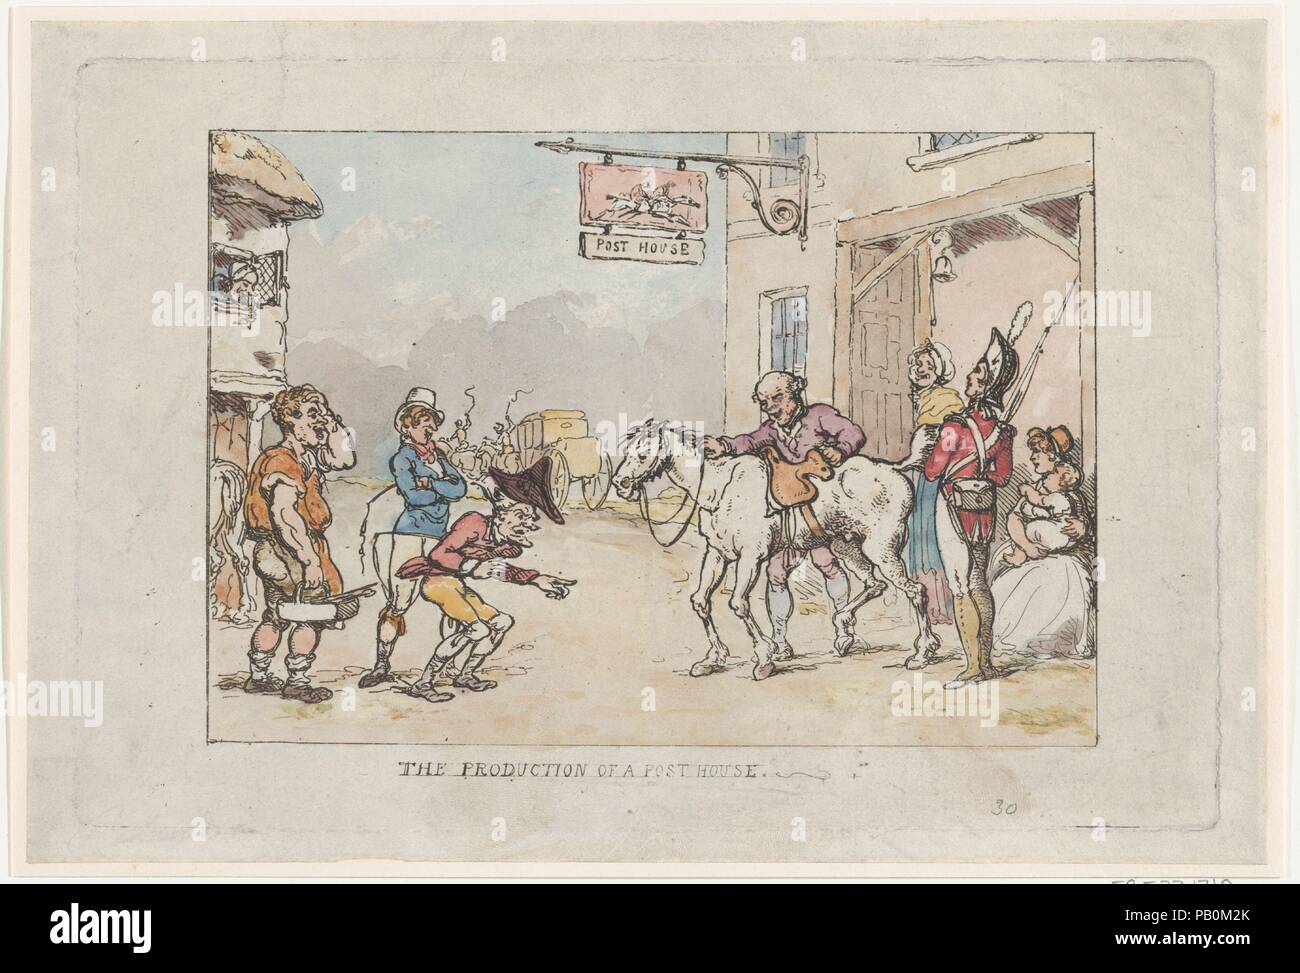 The Production of a Post House. Artist: Thomas Rowlandson (British, London 1757-1827 London). Author: Related outhor Rev. James Beresford (British, 1764-1840). Dimensions: Plate: 6 11/16 × 9 15/16 in. (17 × 25.2 cm)  Sheet: 7 5/16 × 10 13/16 in. (18.5 × 27.4 cm). Series/Portfolio: Miseries of Human Life. Date: 1808. Museum: Metropolitan Museum of Art, New York, USA. Stock Photo